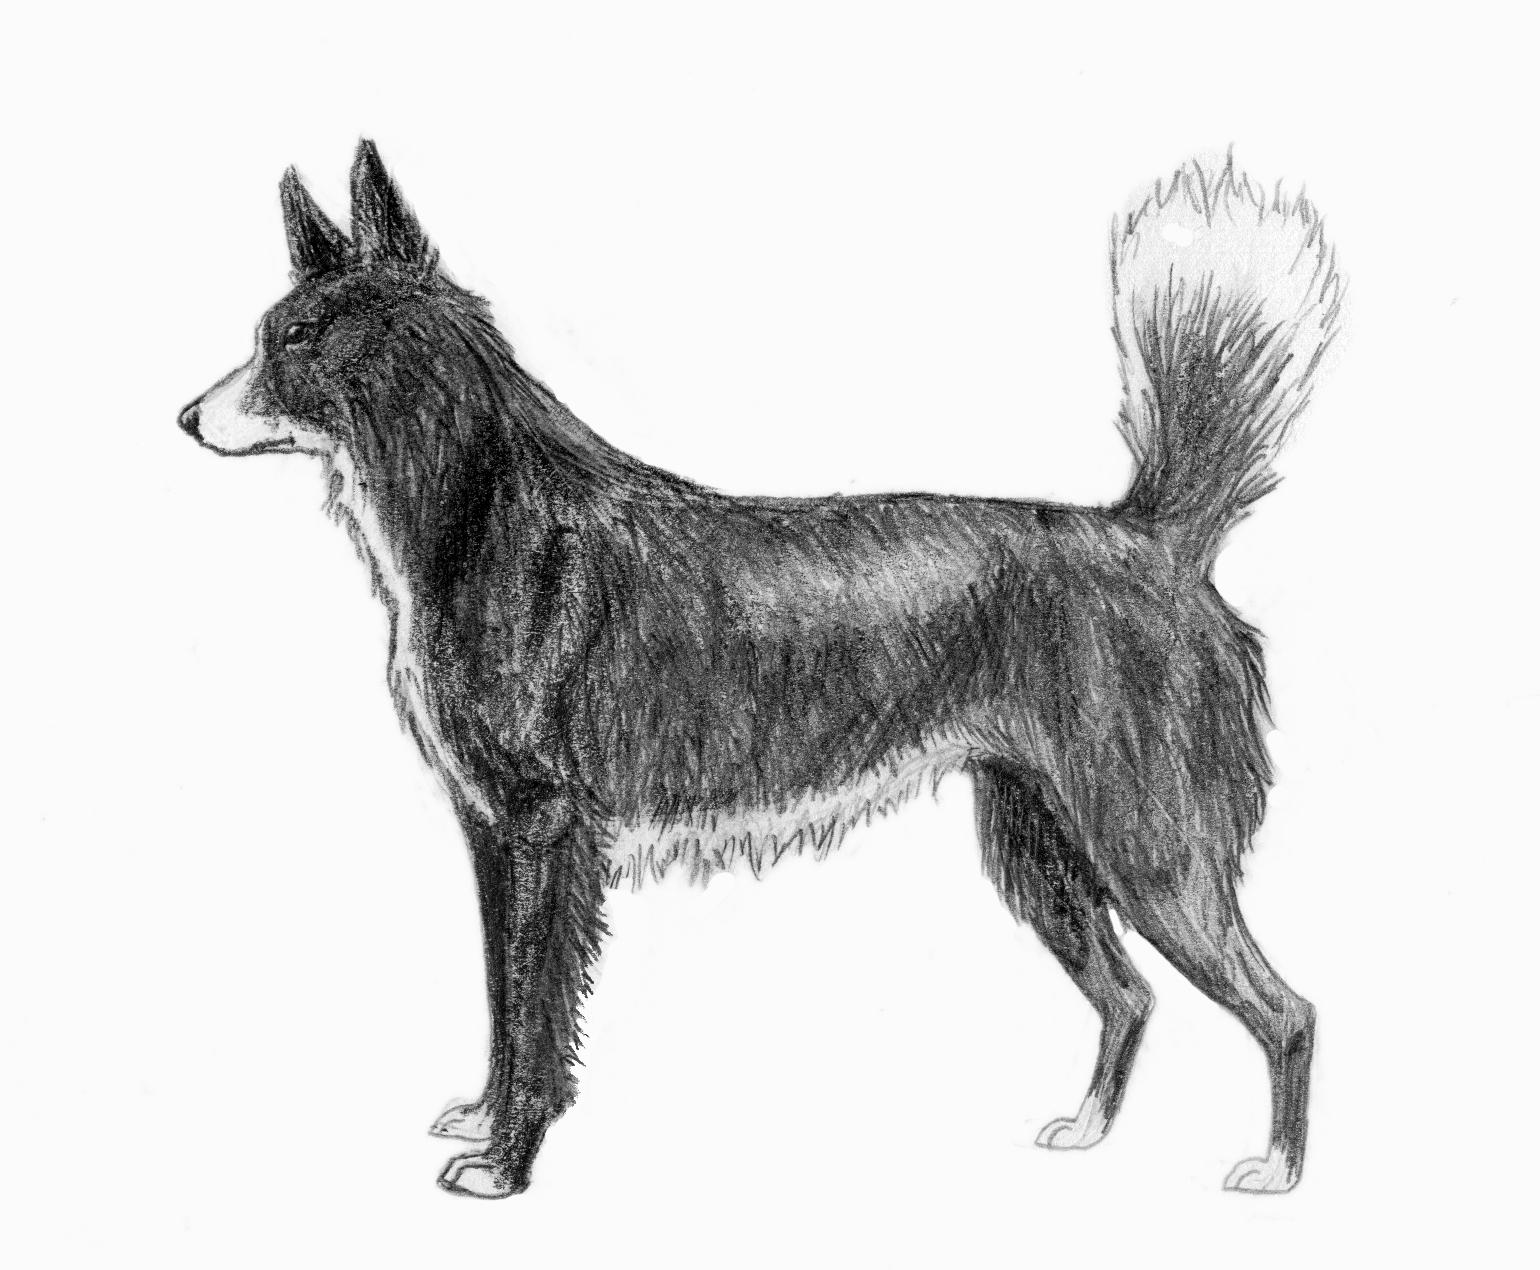 Image source: "Tahltan Bear Dog sketch2" by Pharaoh Hound - Own work. Licensed under CC BY 2.5 via Wikimedia Commons 